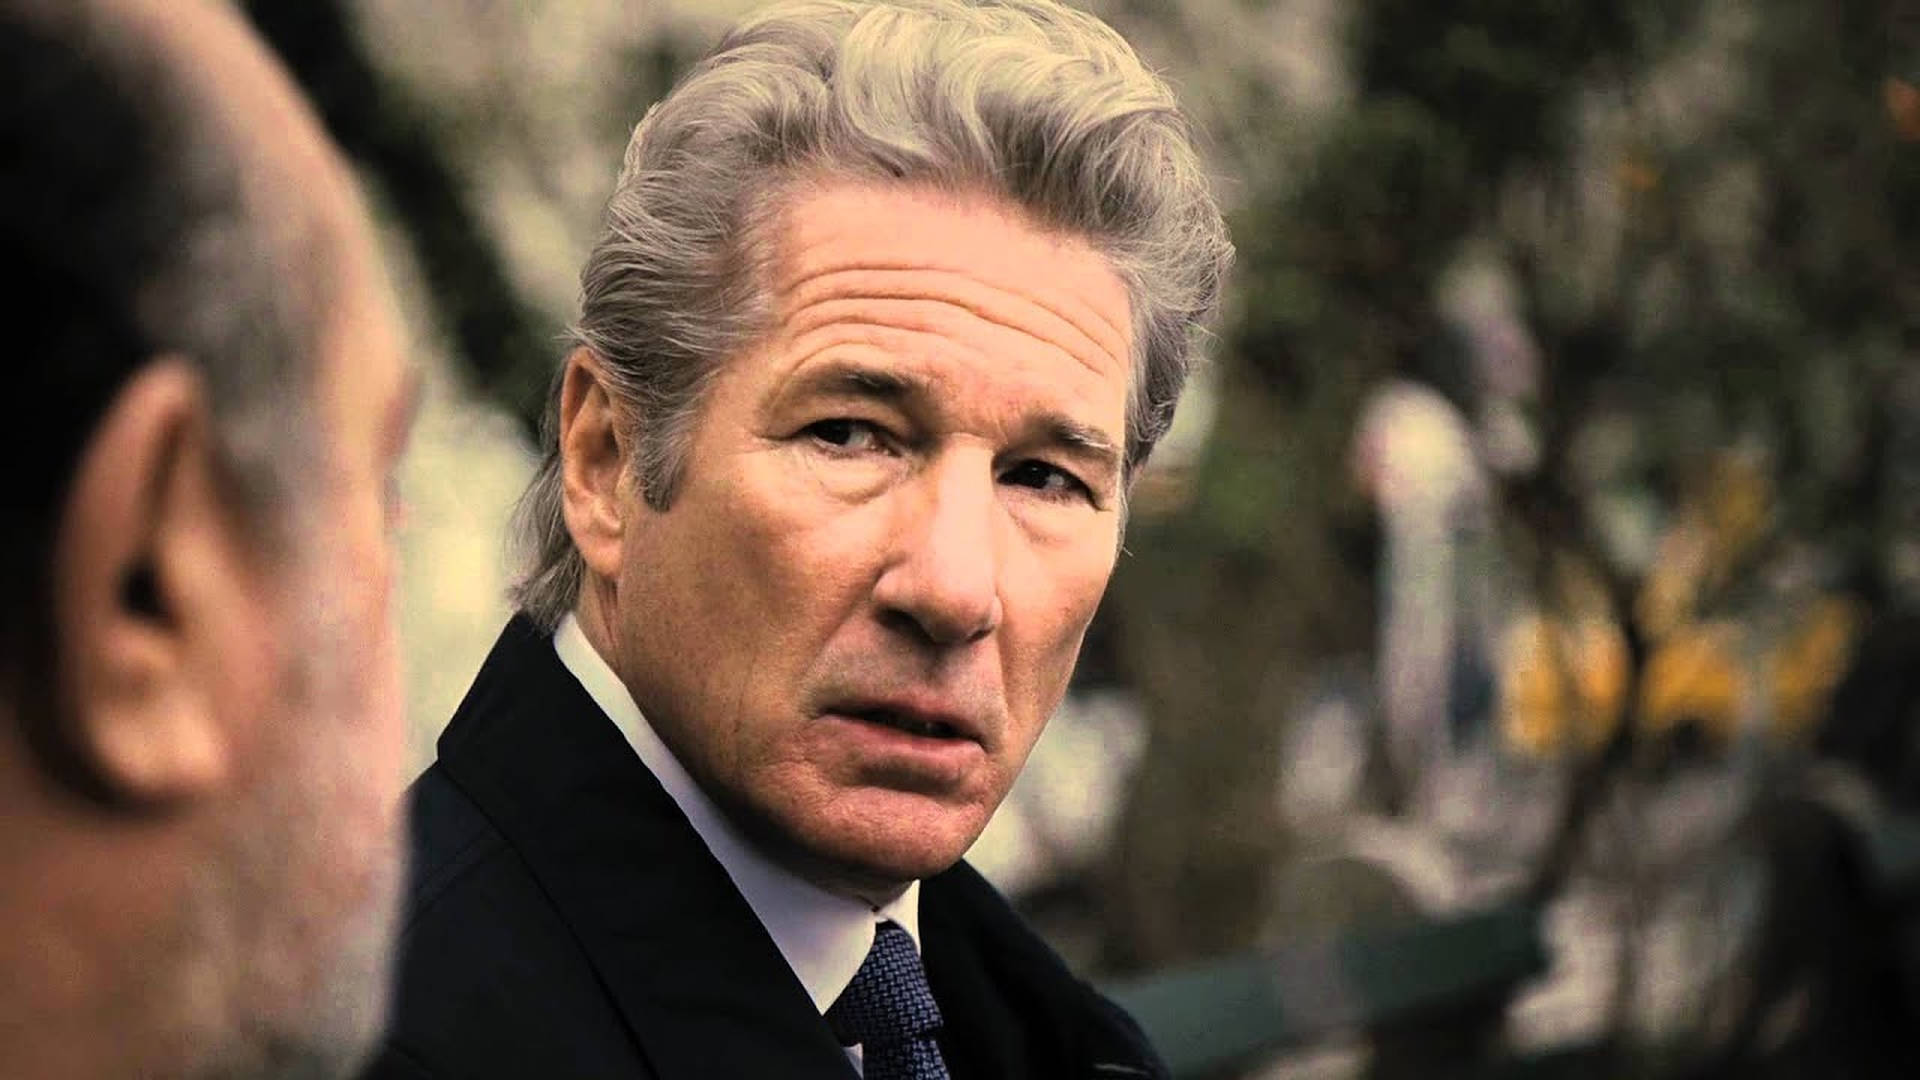 Richard Gere Serious Expression Wallpaper